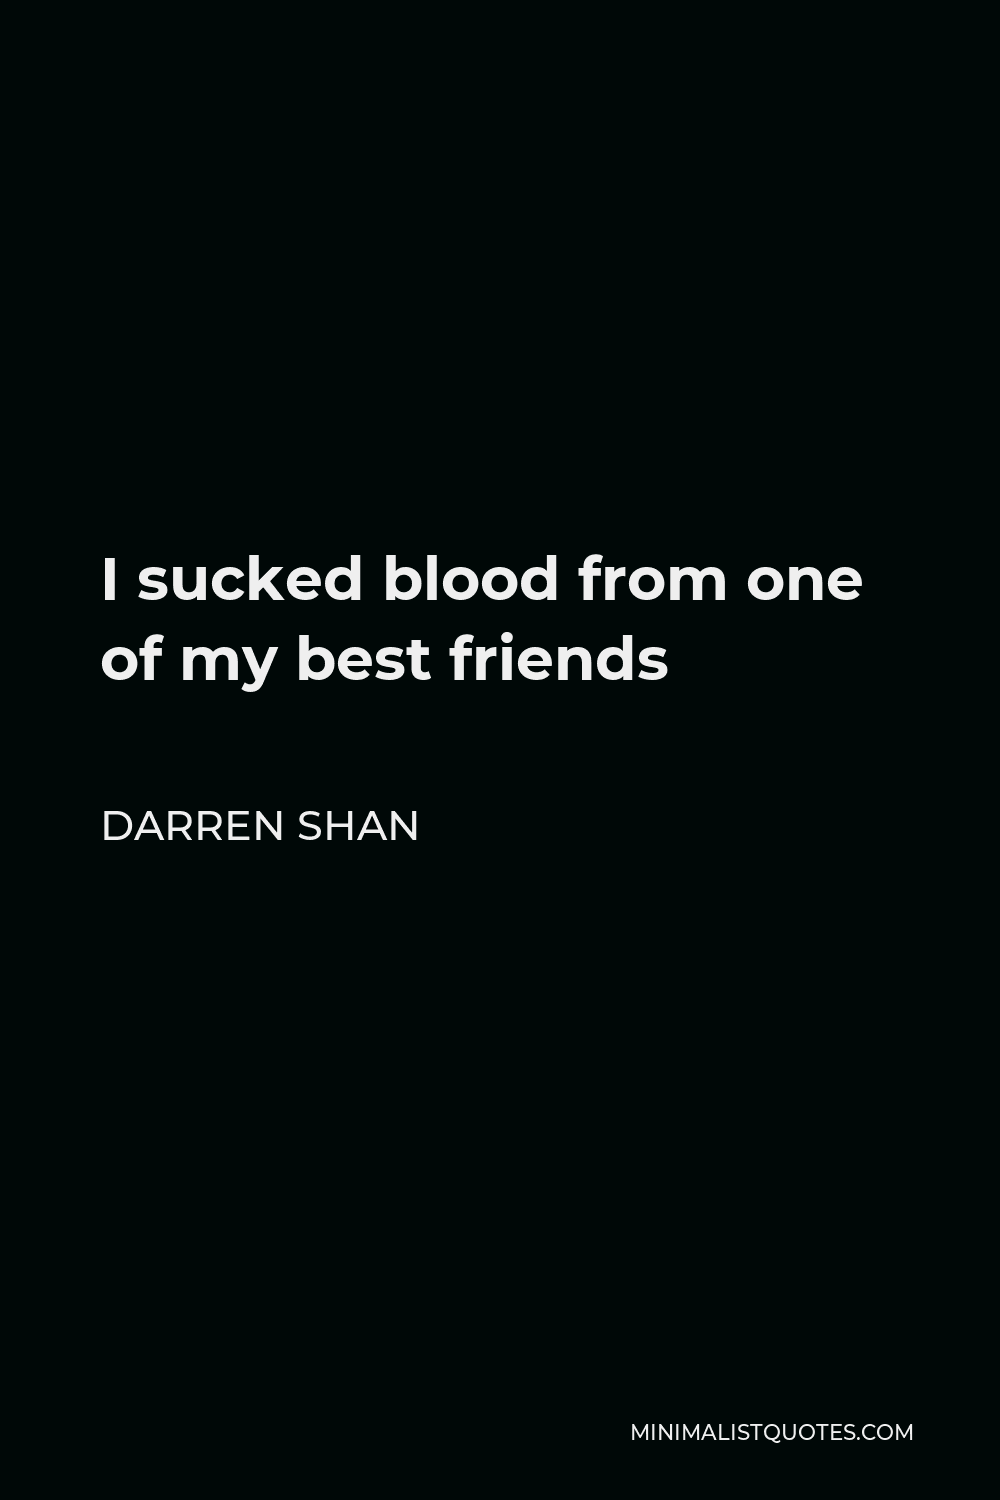 Darren Shan Quote - I sucked blood from one of my best friends